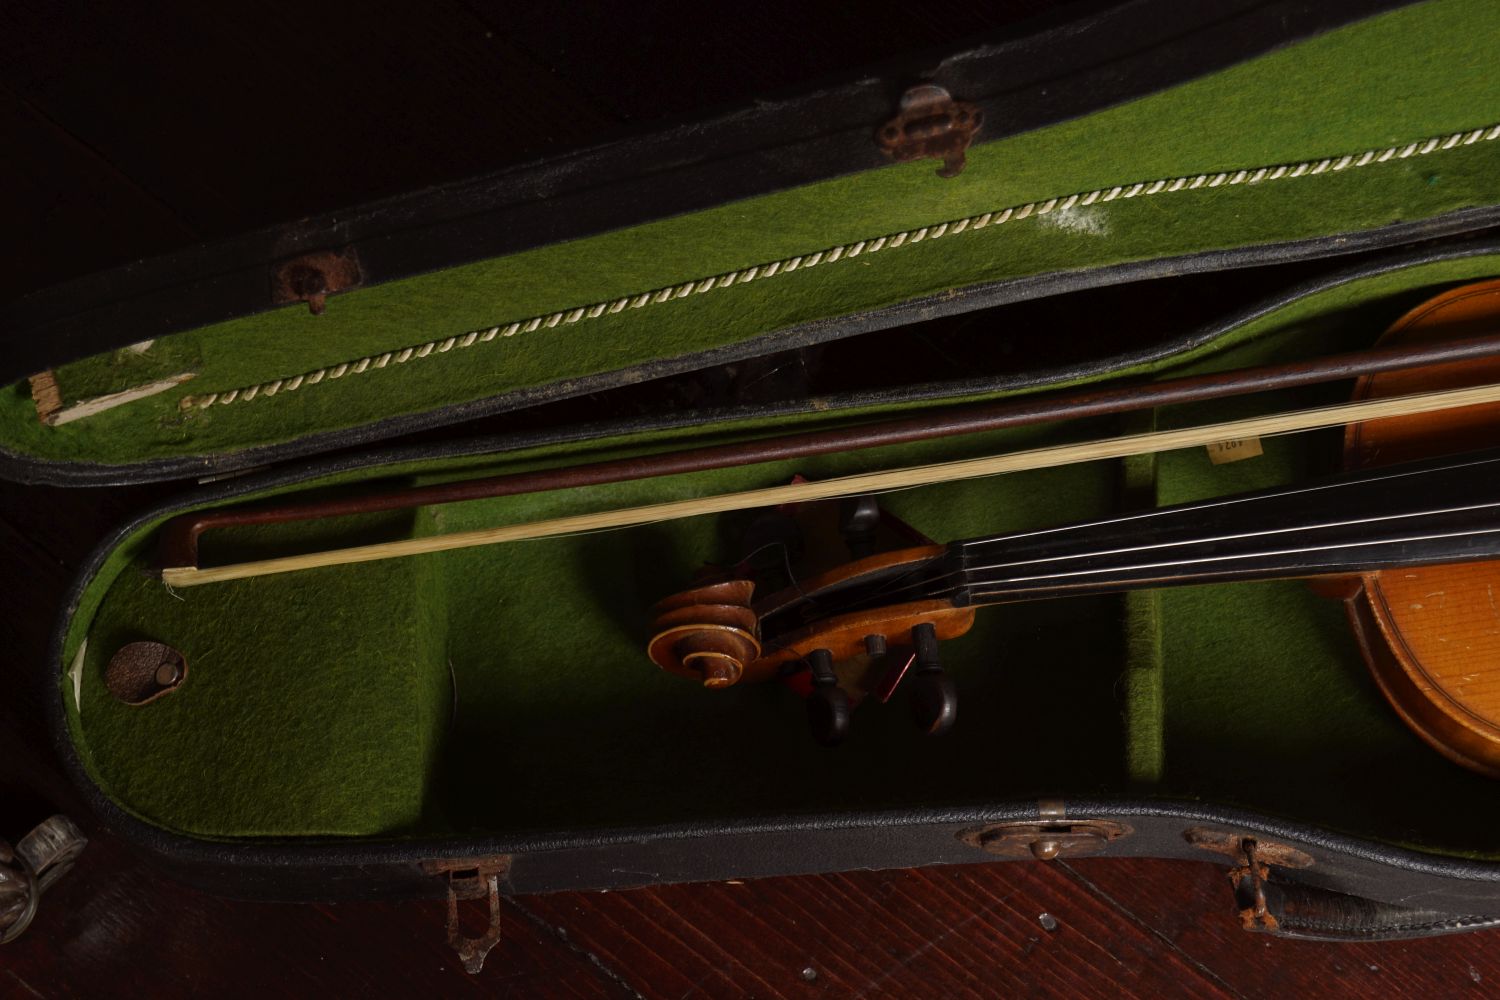 19TH-CENTURY FRENCH VIOLIN - Image 3 of 3